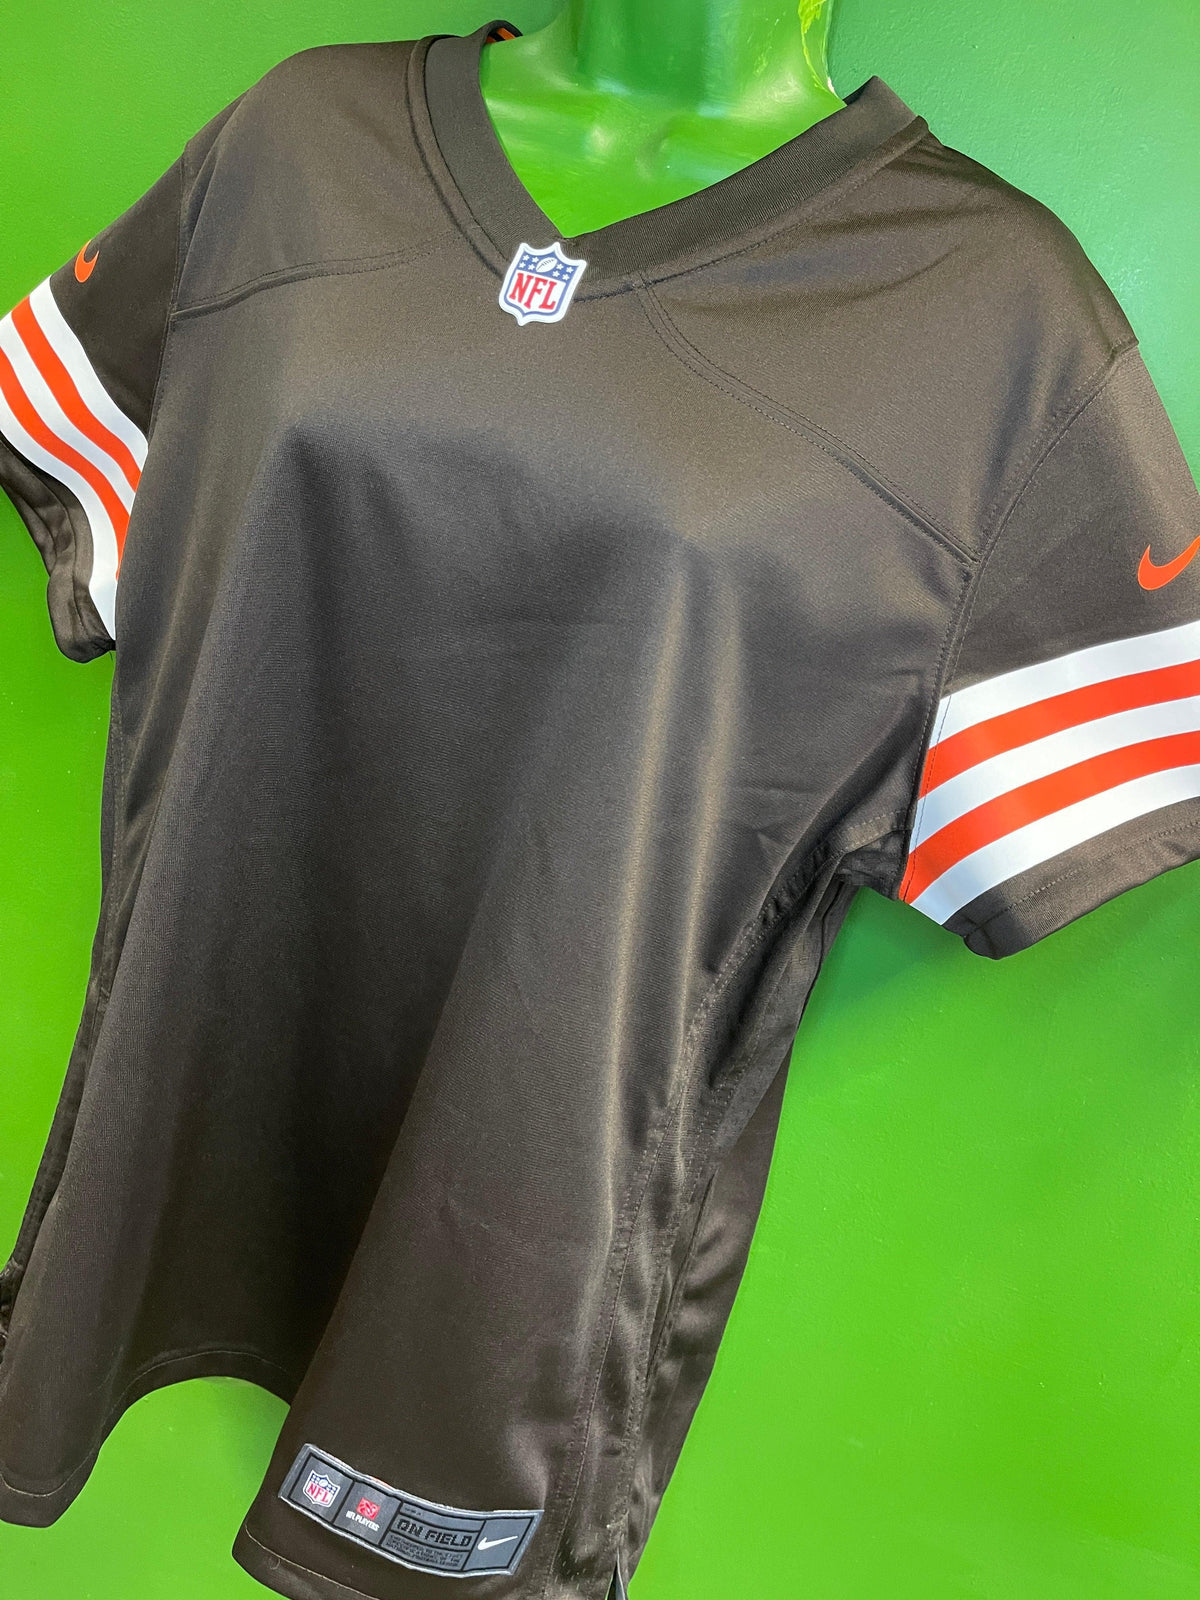 NFL Cleveland Browns Plain Blank Game Jersey Women's X-Large NWT